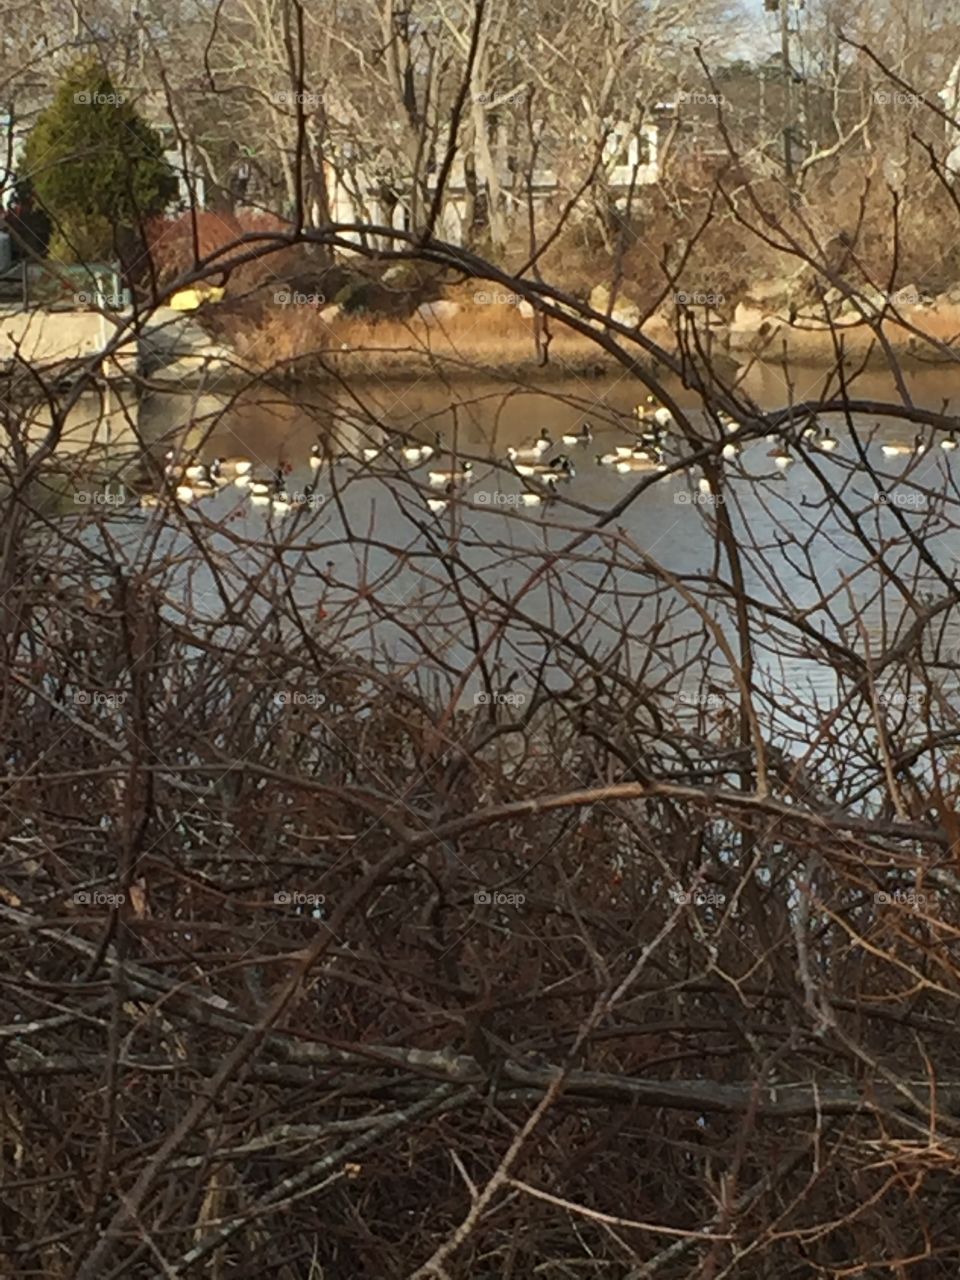 More geese on the ice